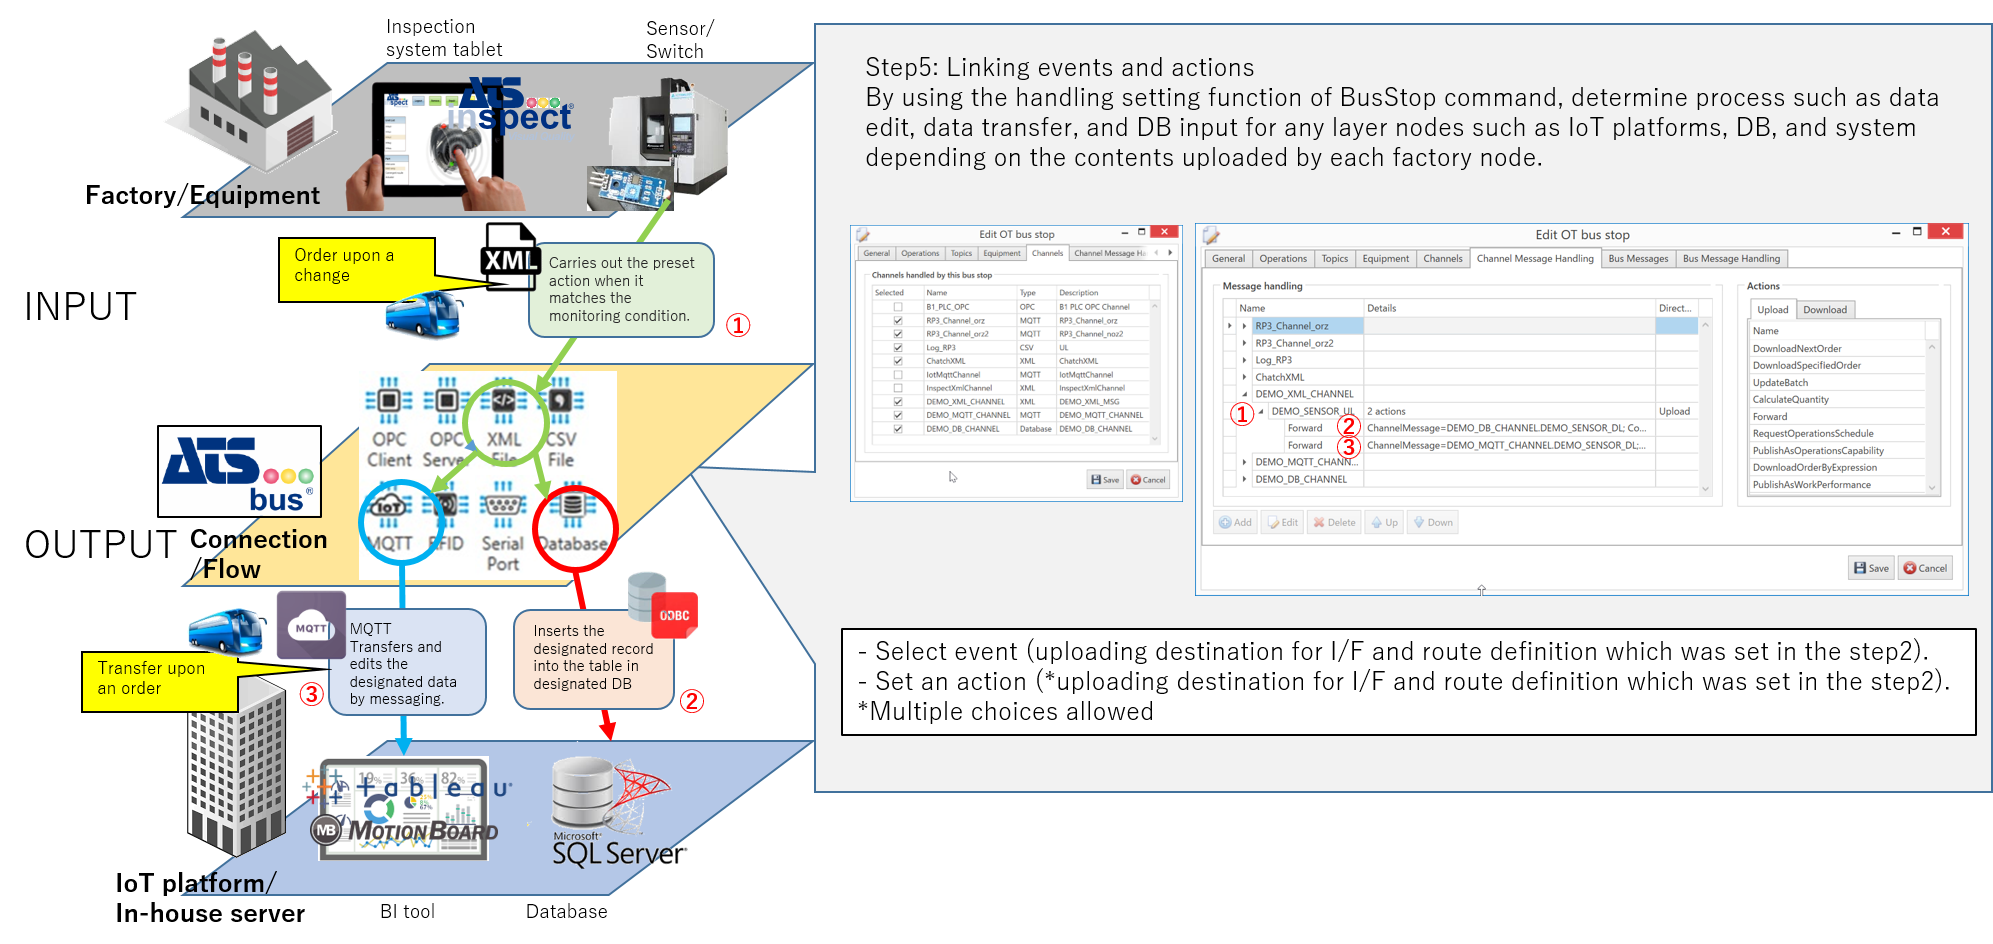 3. ATS Bus operation – 3. Event, action, and linkage definition